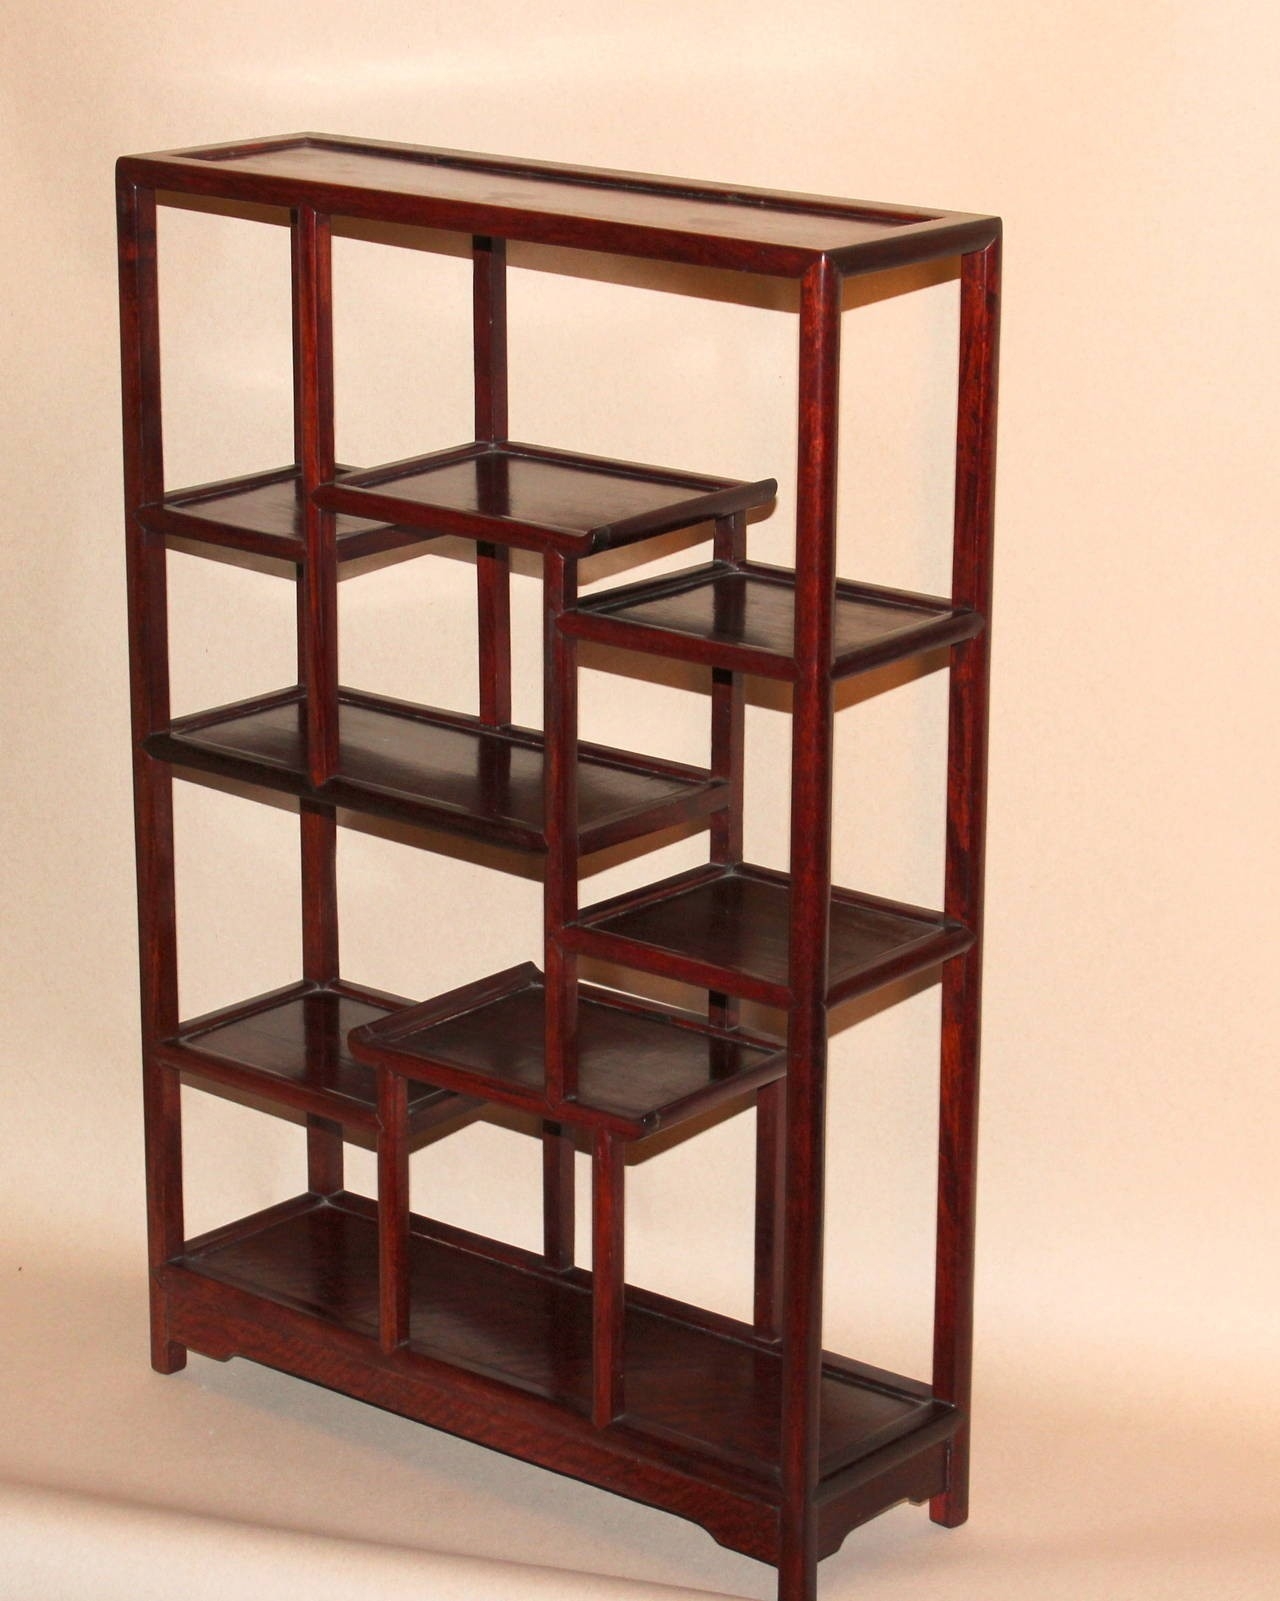 Chinese red suanzhi wood rosewood 3 step style curio stand display shelf 9.4"L 